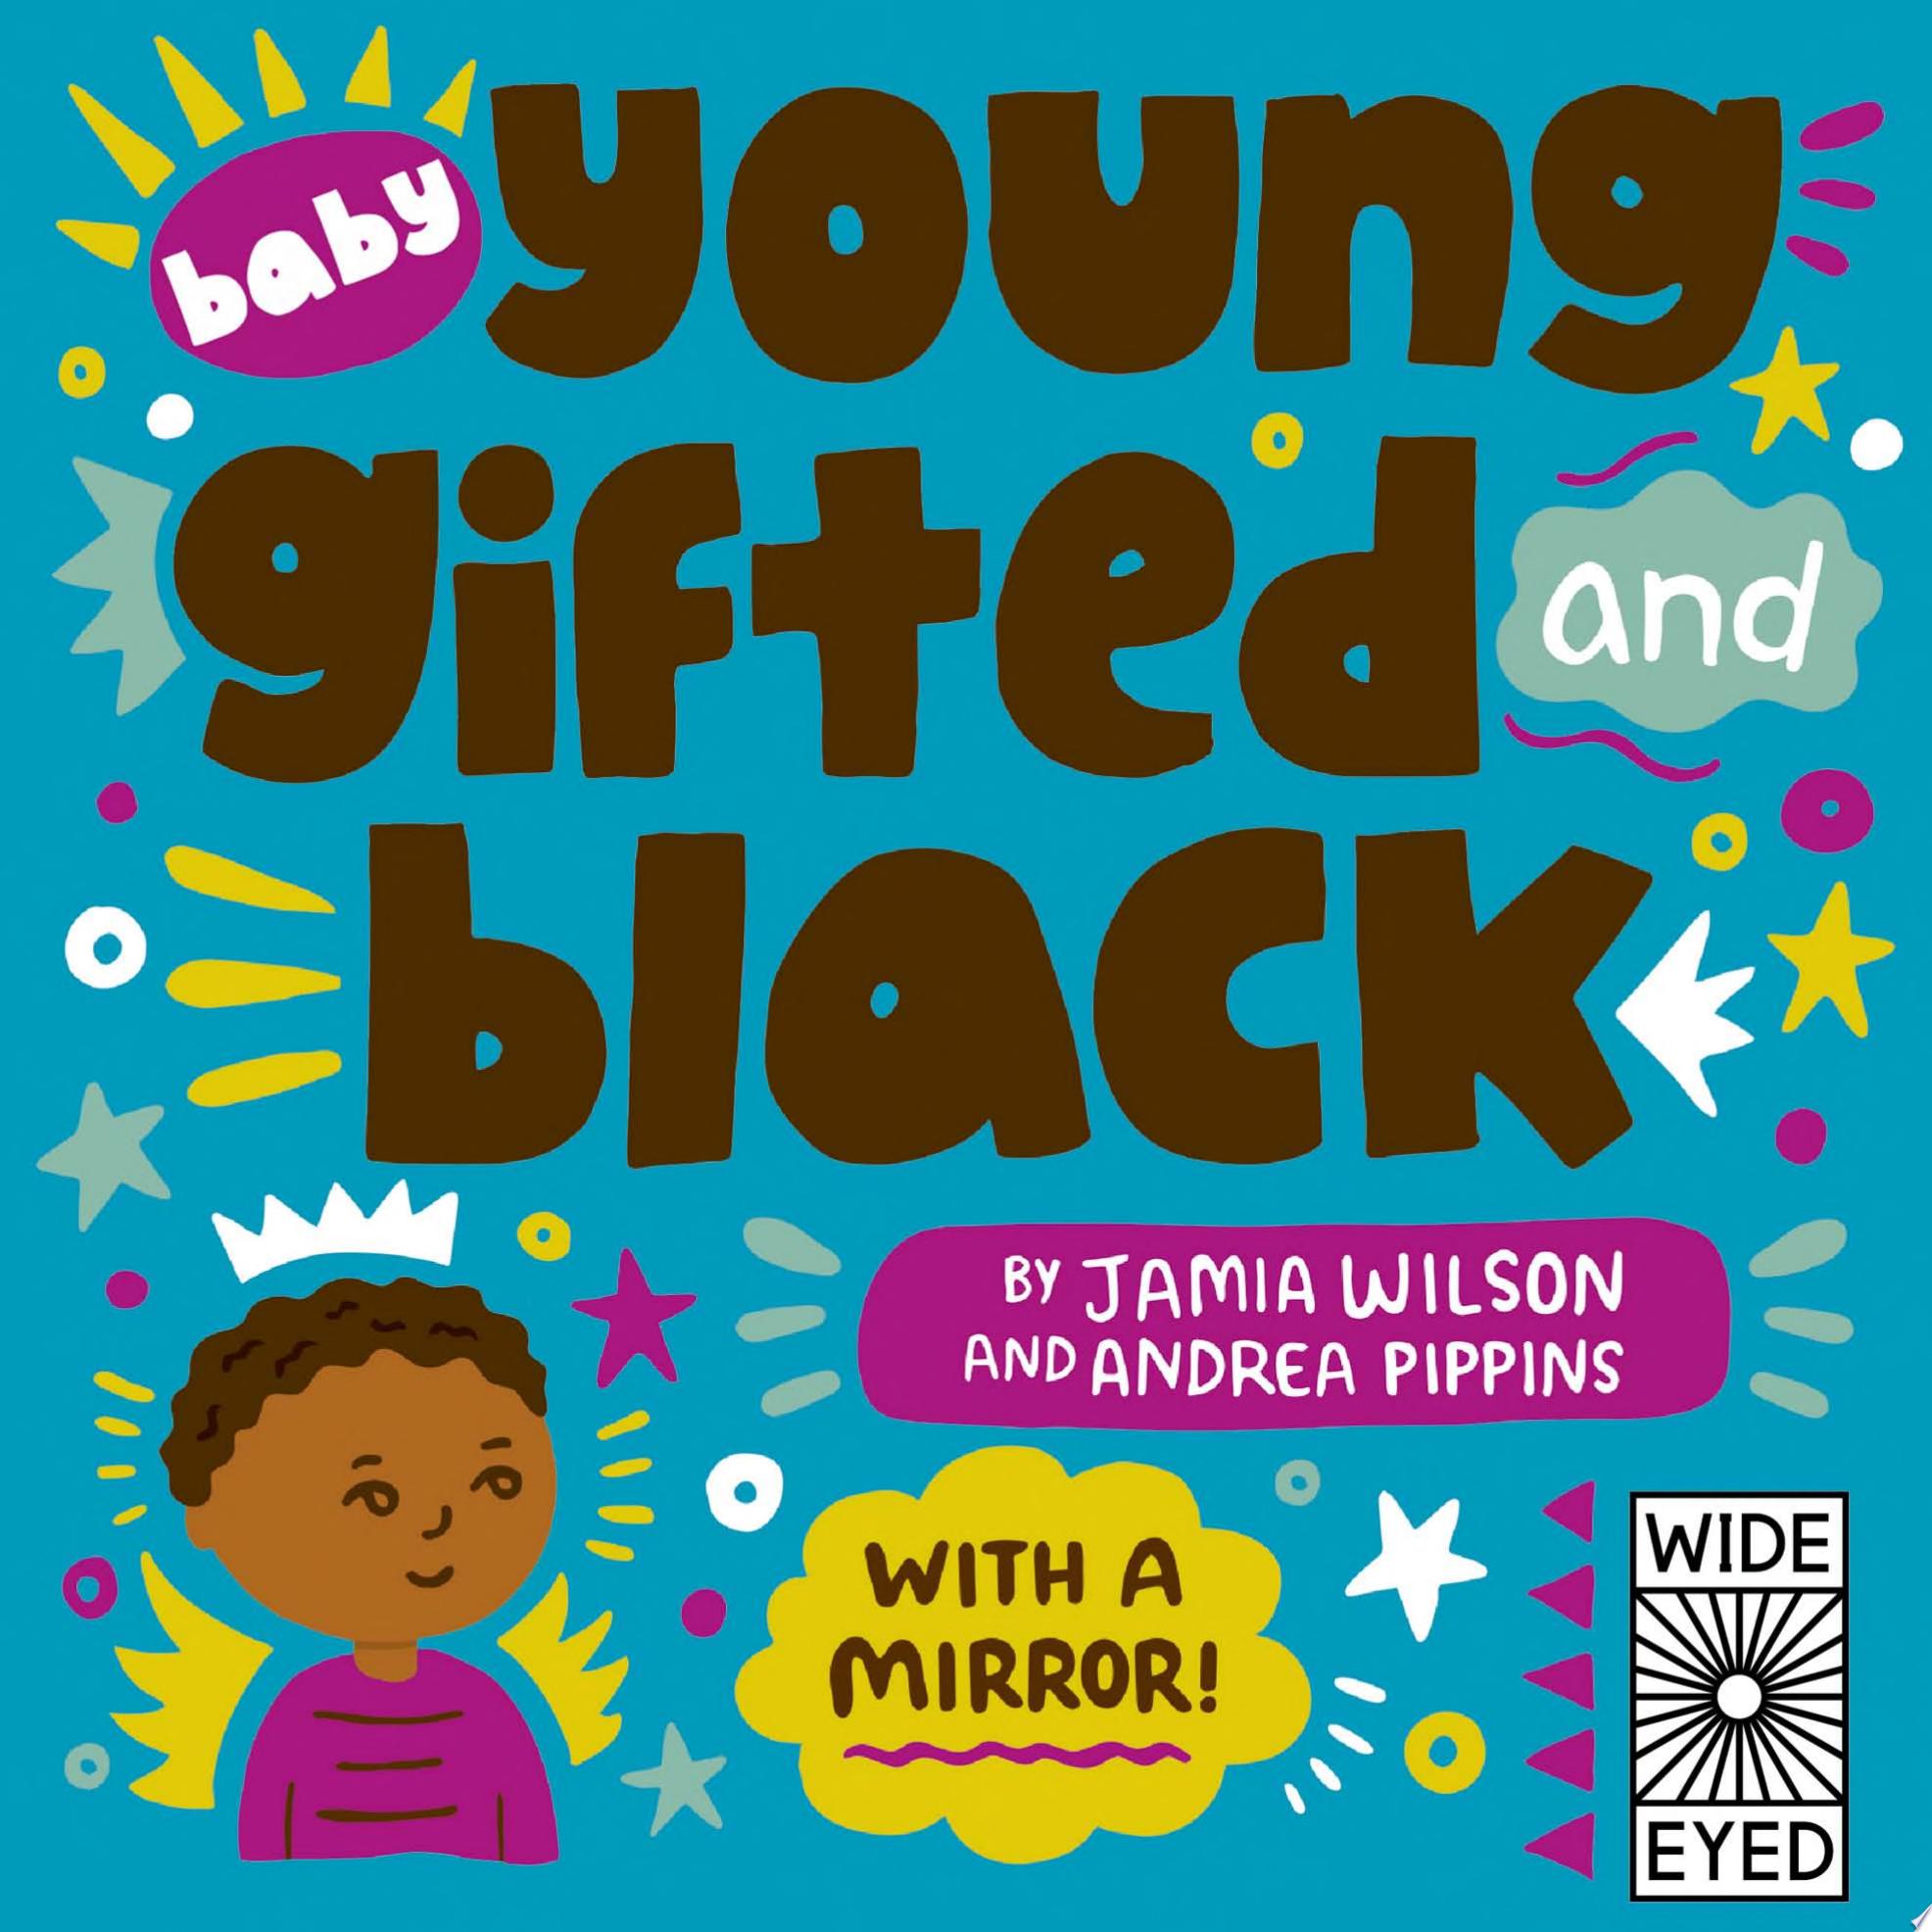 Image for "Baby Young, Gifted, and Black"